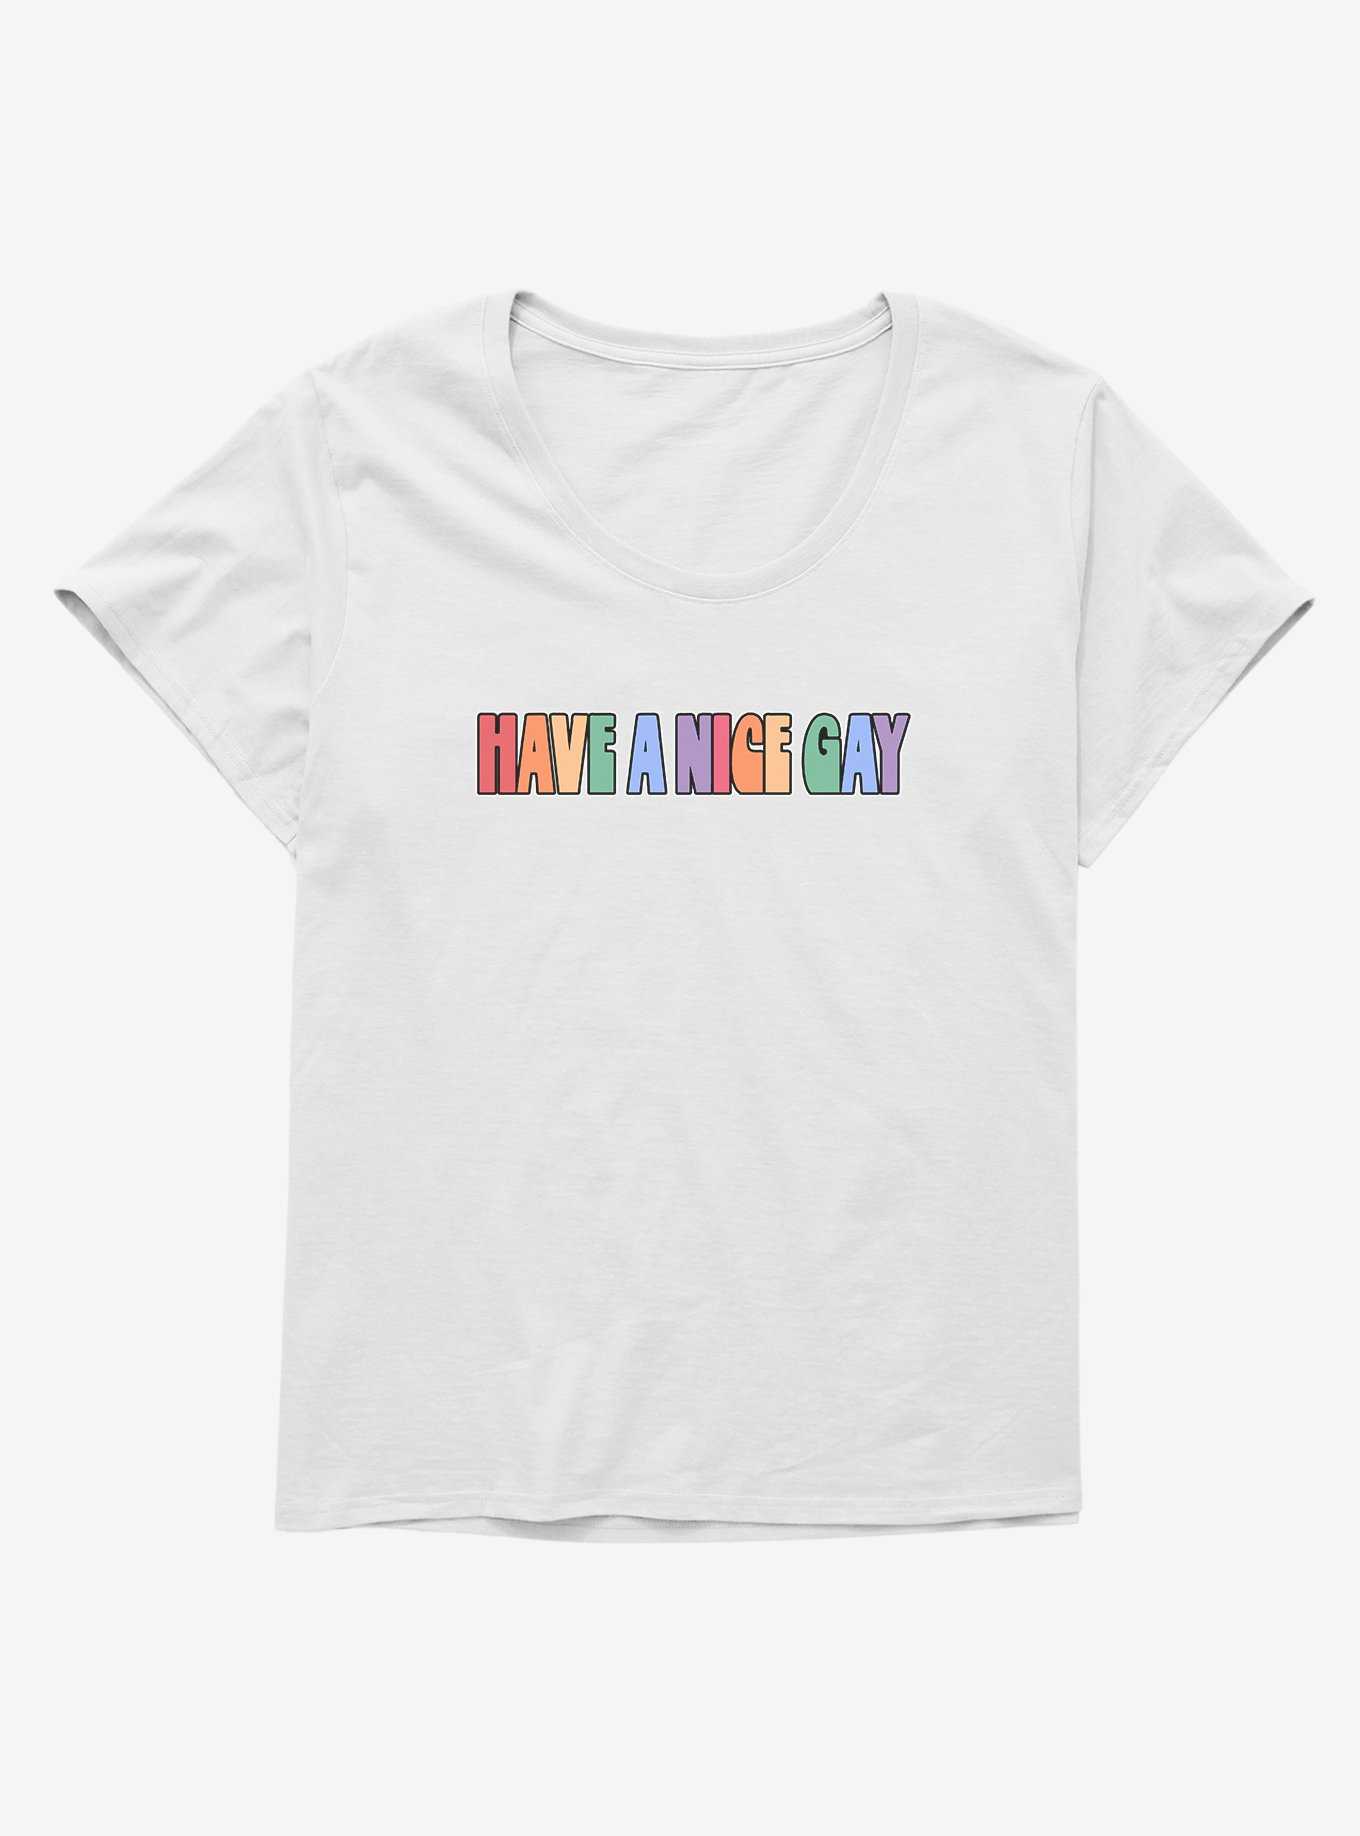 Have A Nice Gay T-Shirt Plus Size, , hi-res